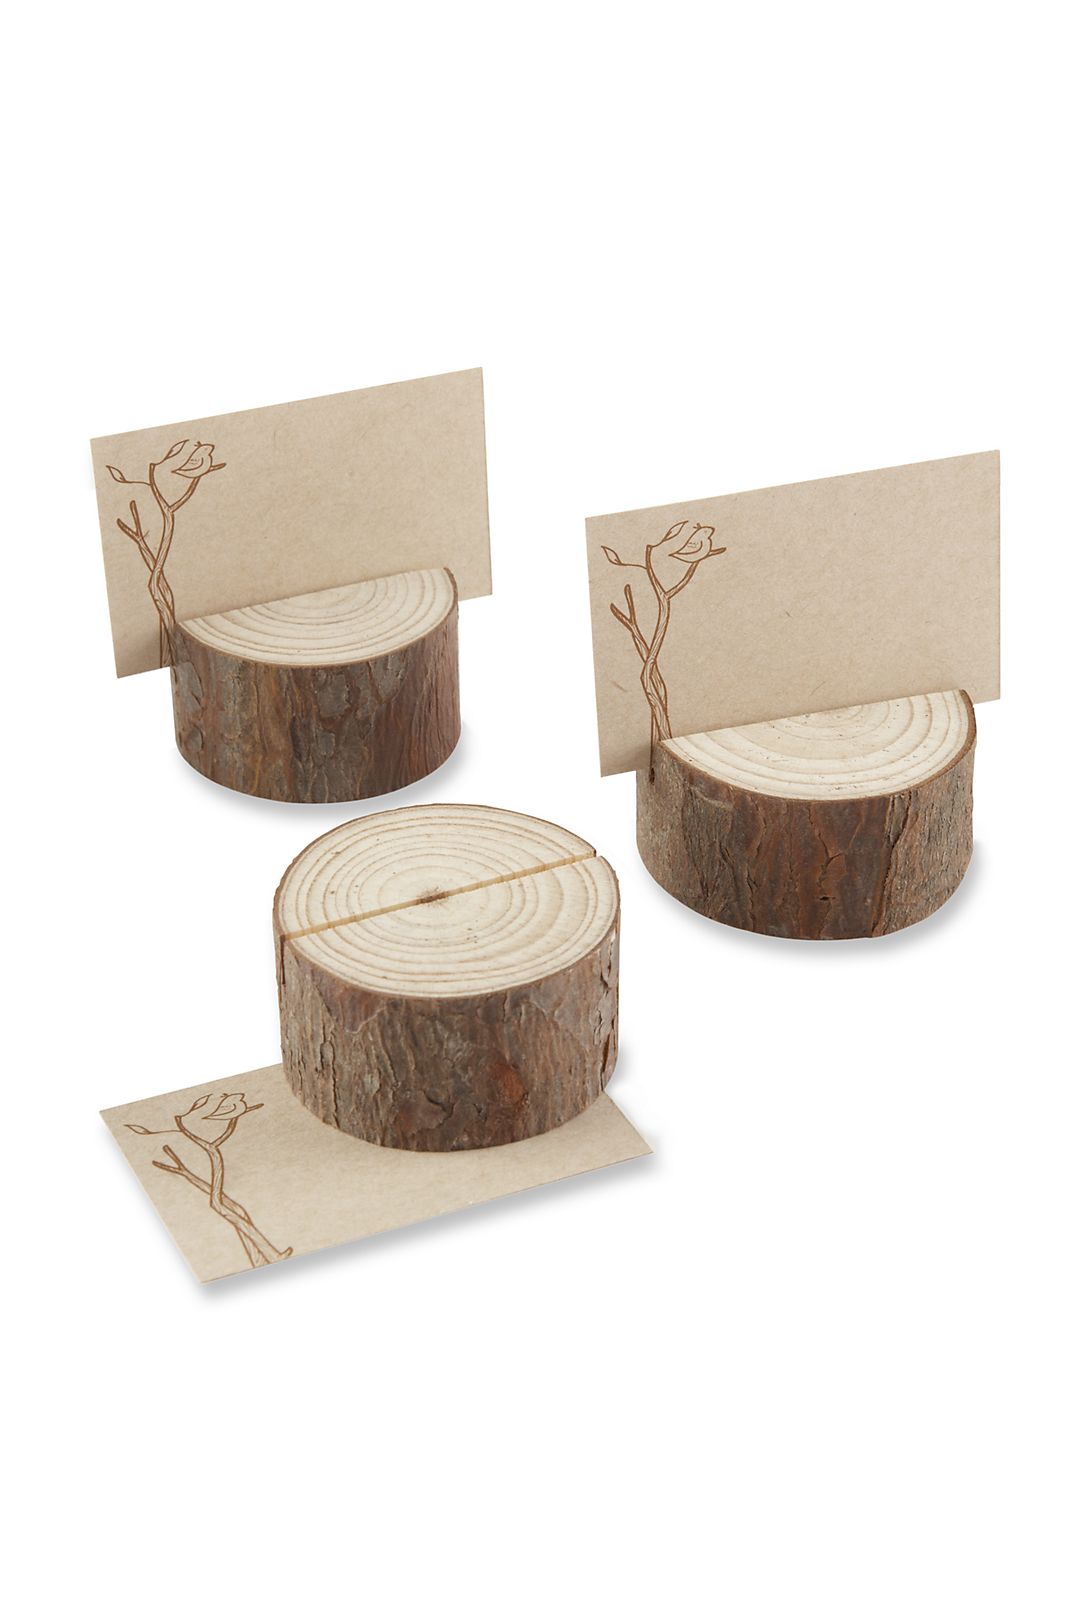 Rustic Wood Place Card Holder Set of 4 Image 2